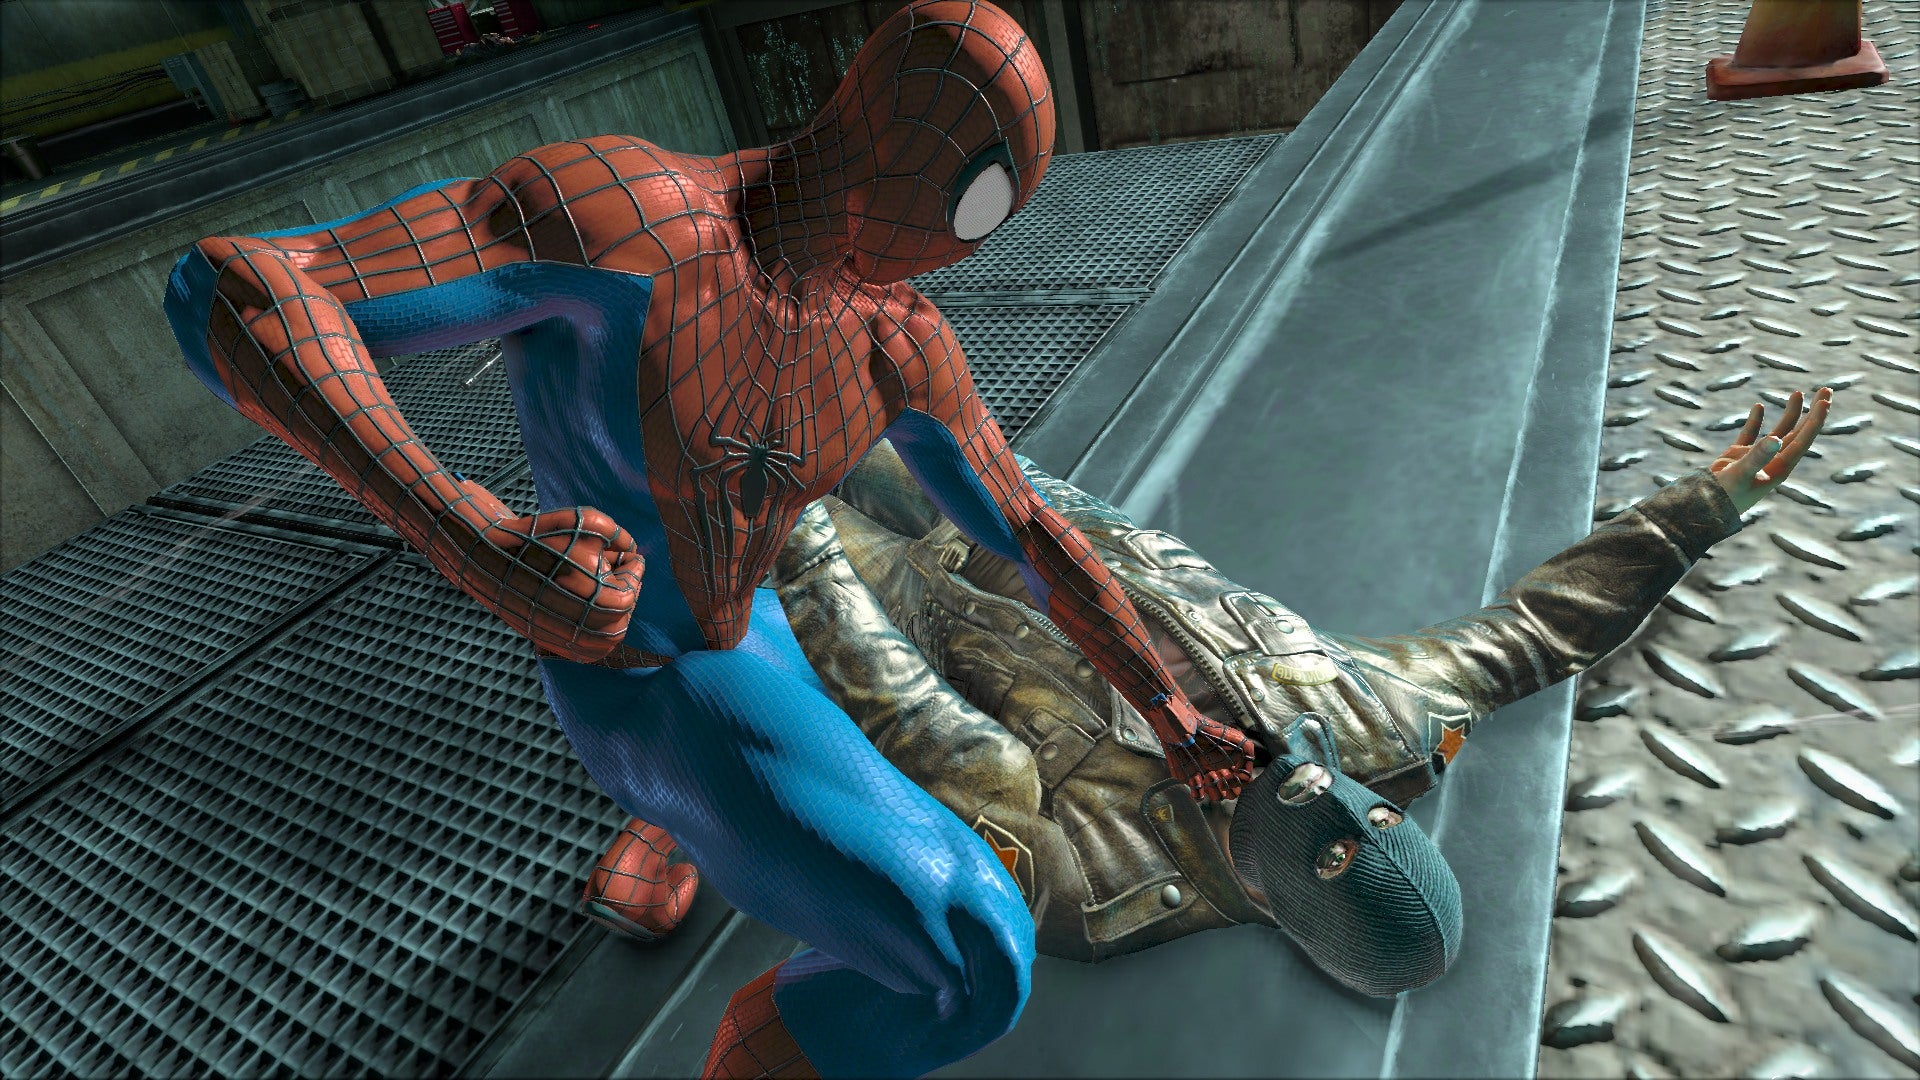 the amazing spider man pc game keeps going black and freezing